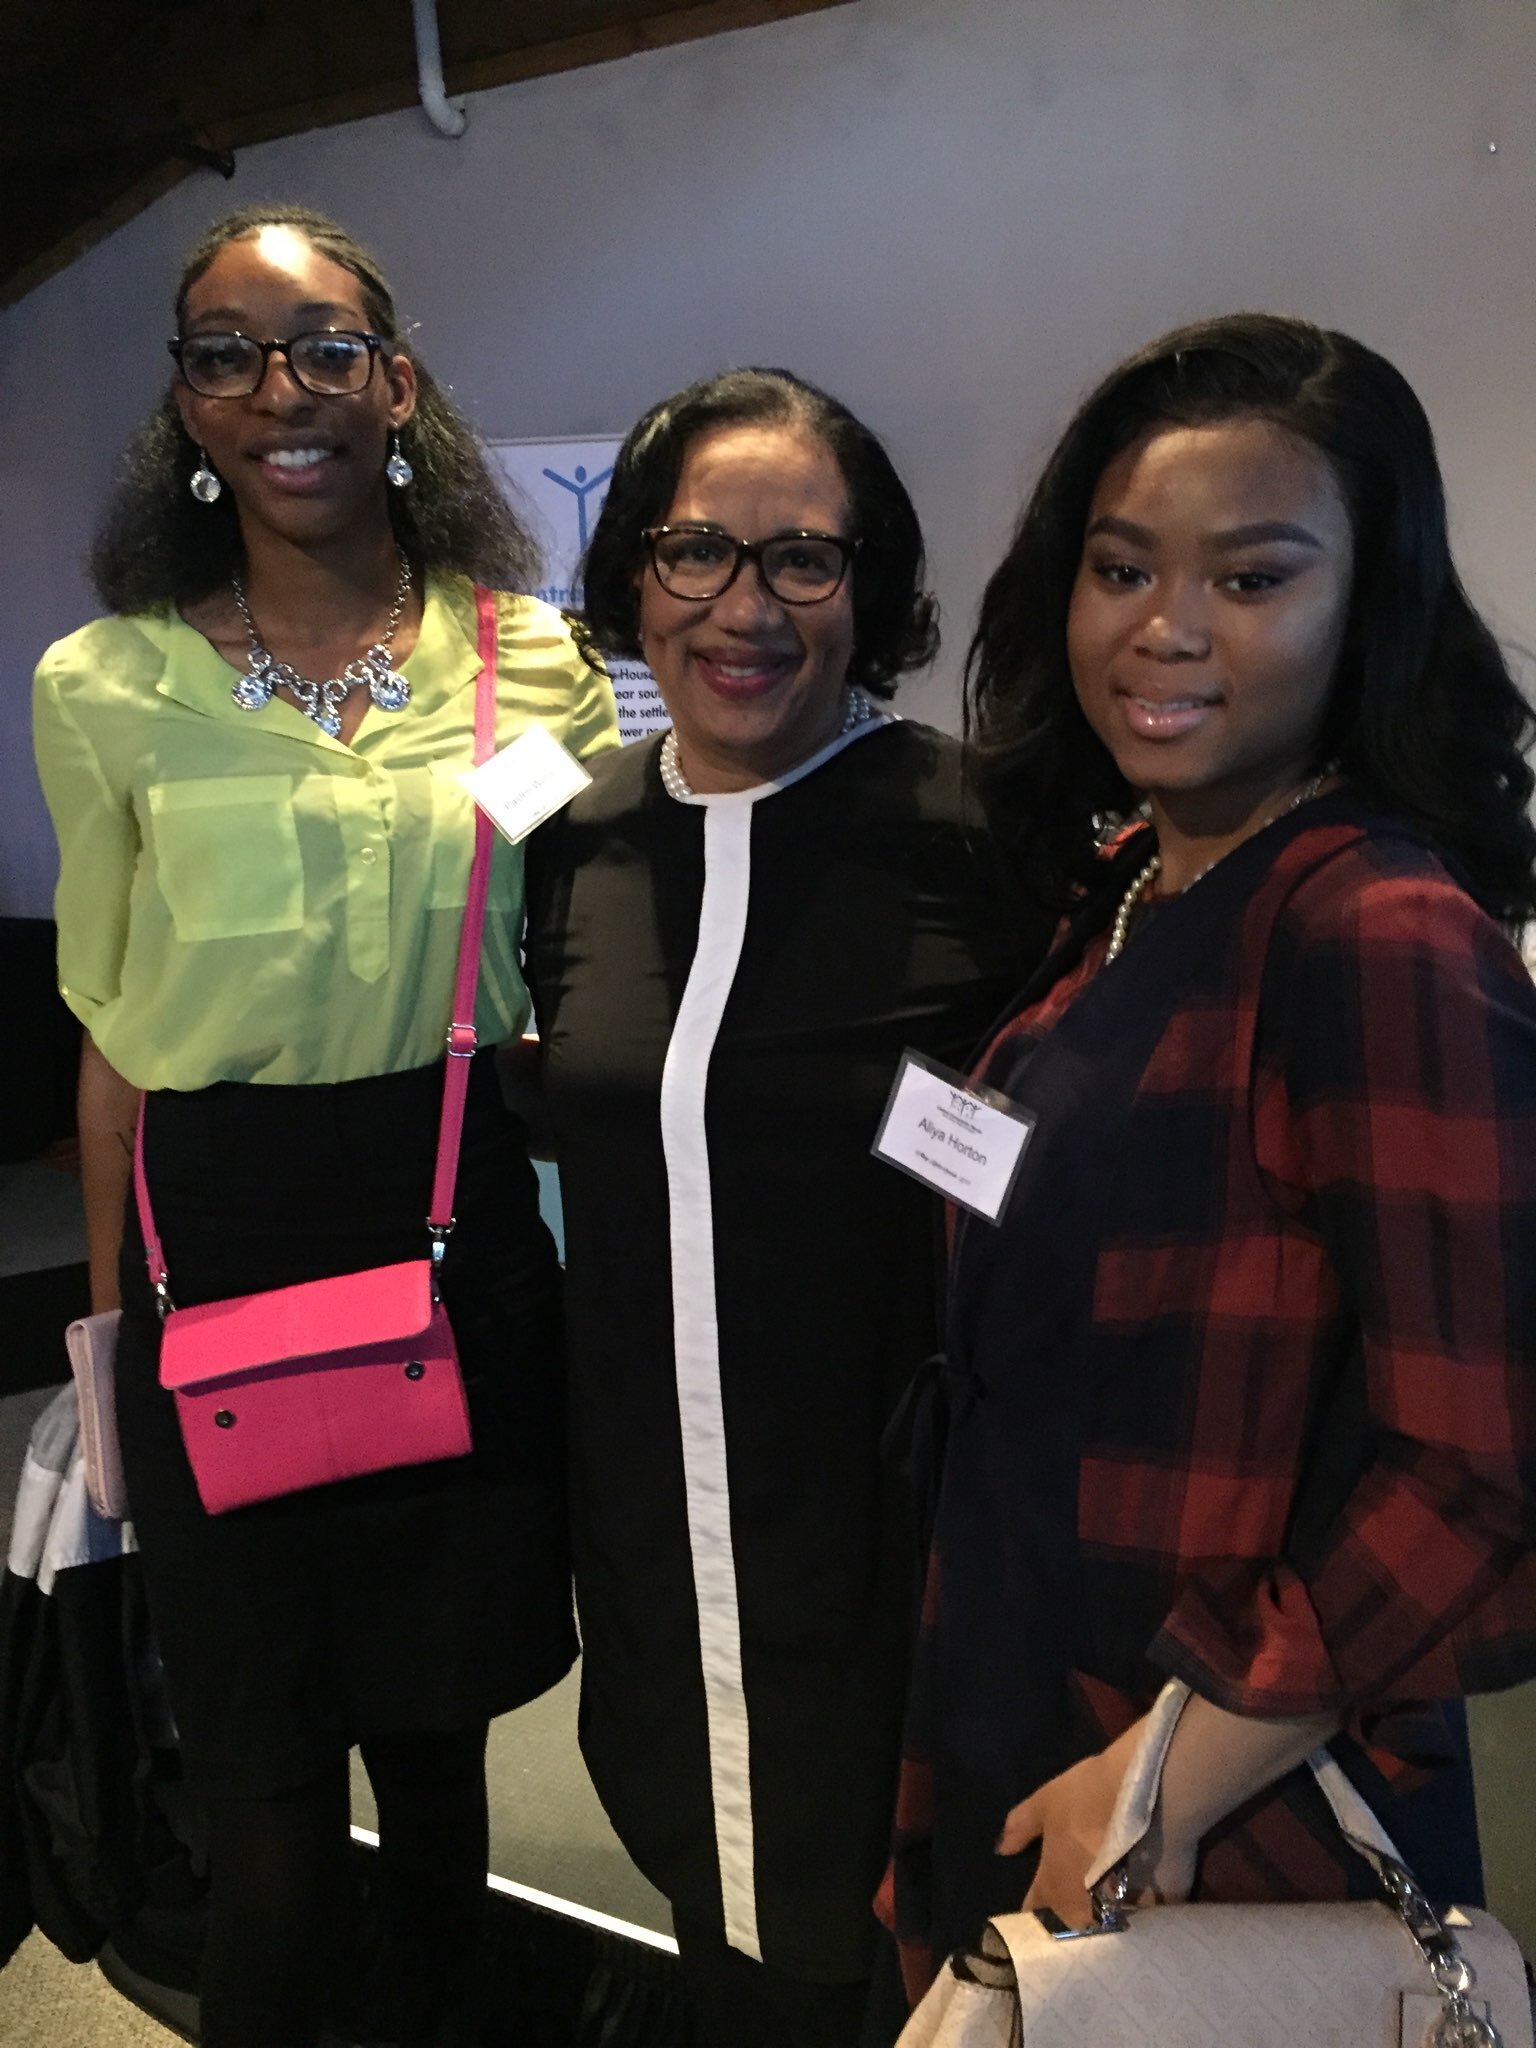  Picture of (right to left) Black Girl Think Tank Charter member Aliya Horton, Councilmember Tyson, and BGTT Charter member Paiden Williams.&nbsp; The picture was taken during the beginning process of the establishment of the Commission on Black Girl